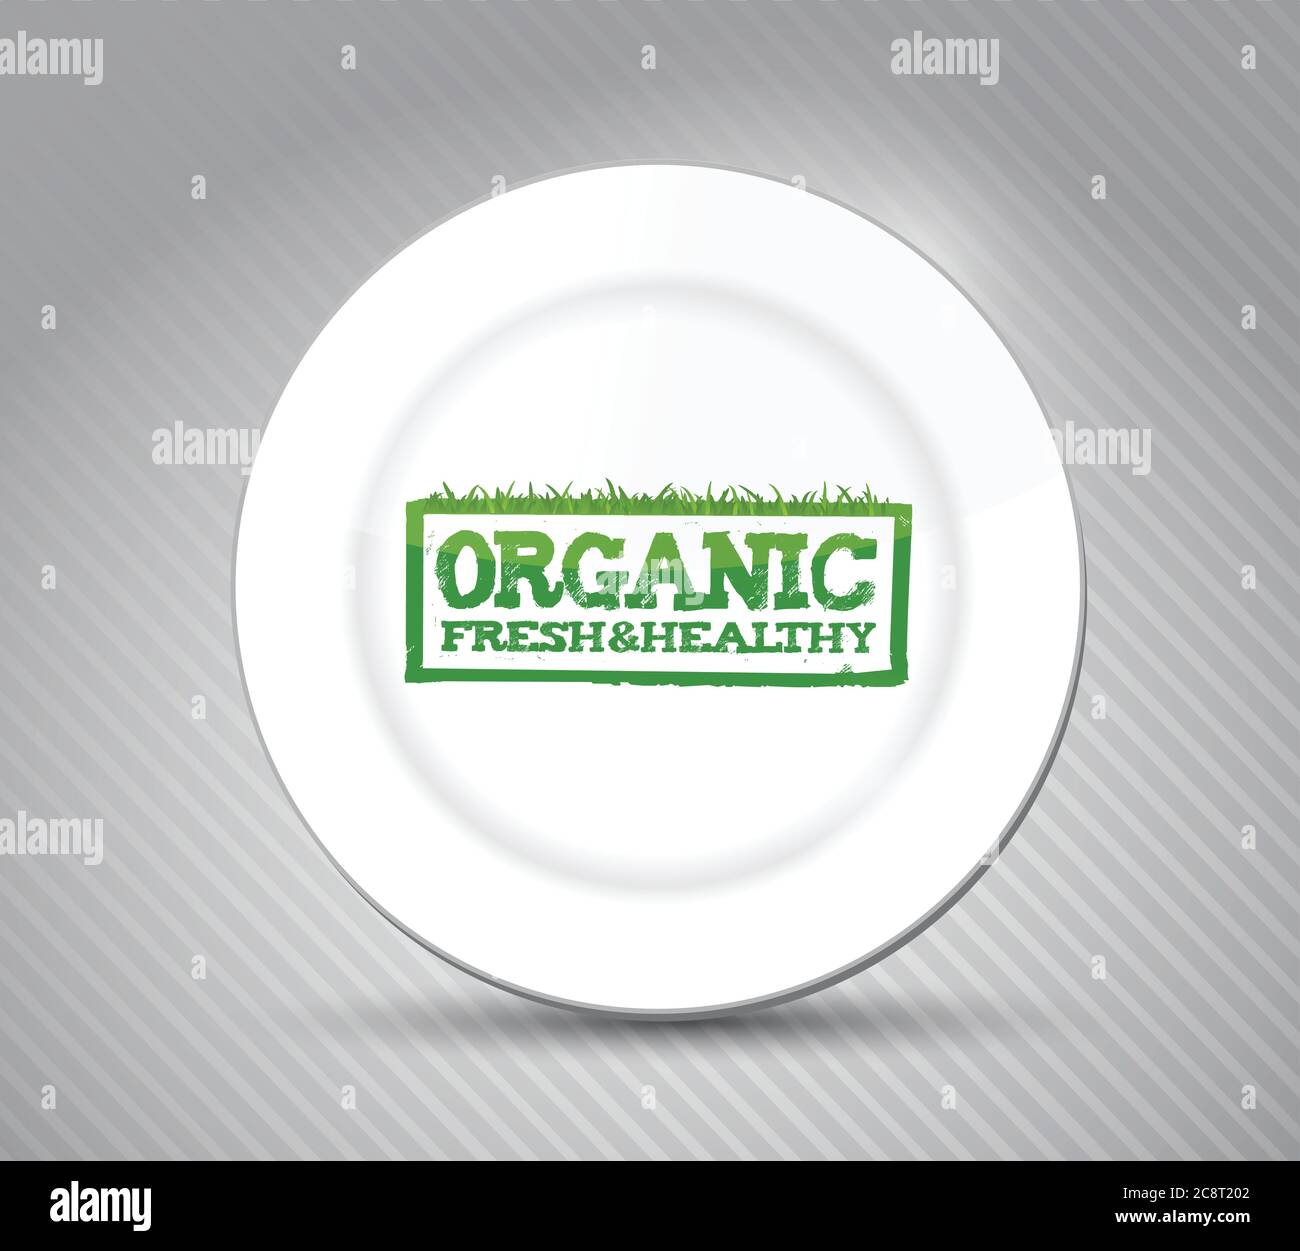 Organic fresh and healthy sign on a plate illustration design over a white background Stock Vector